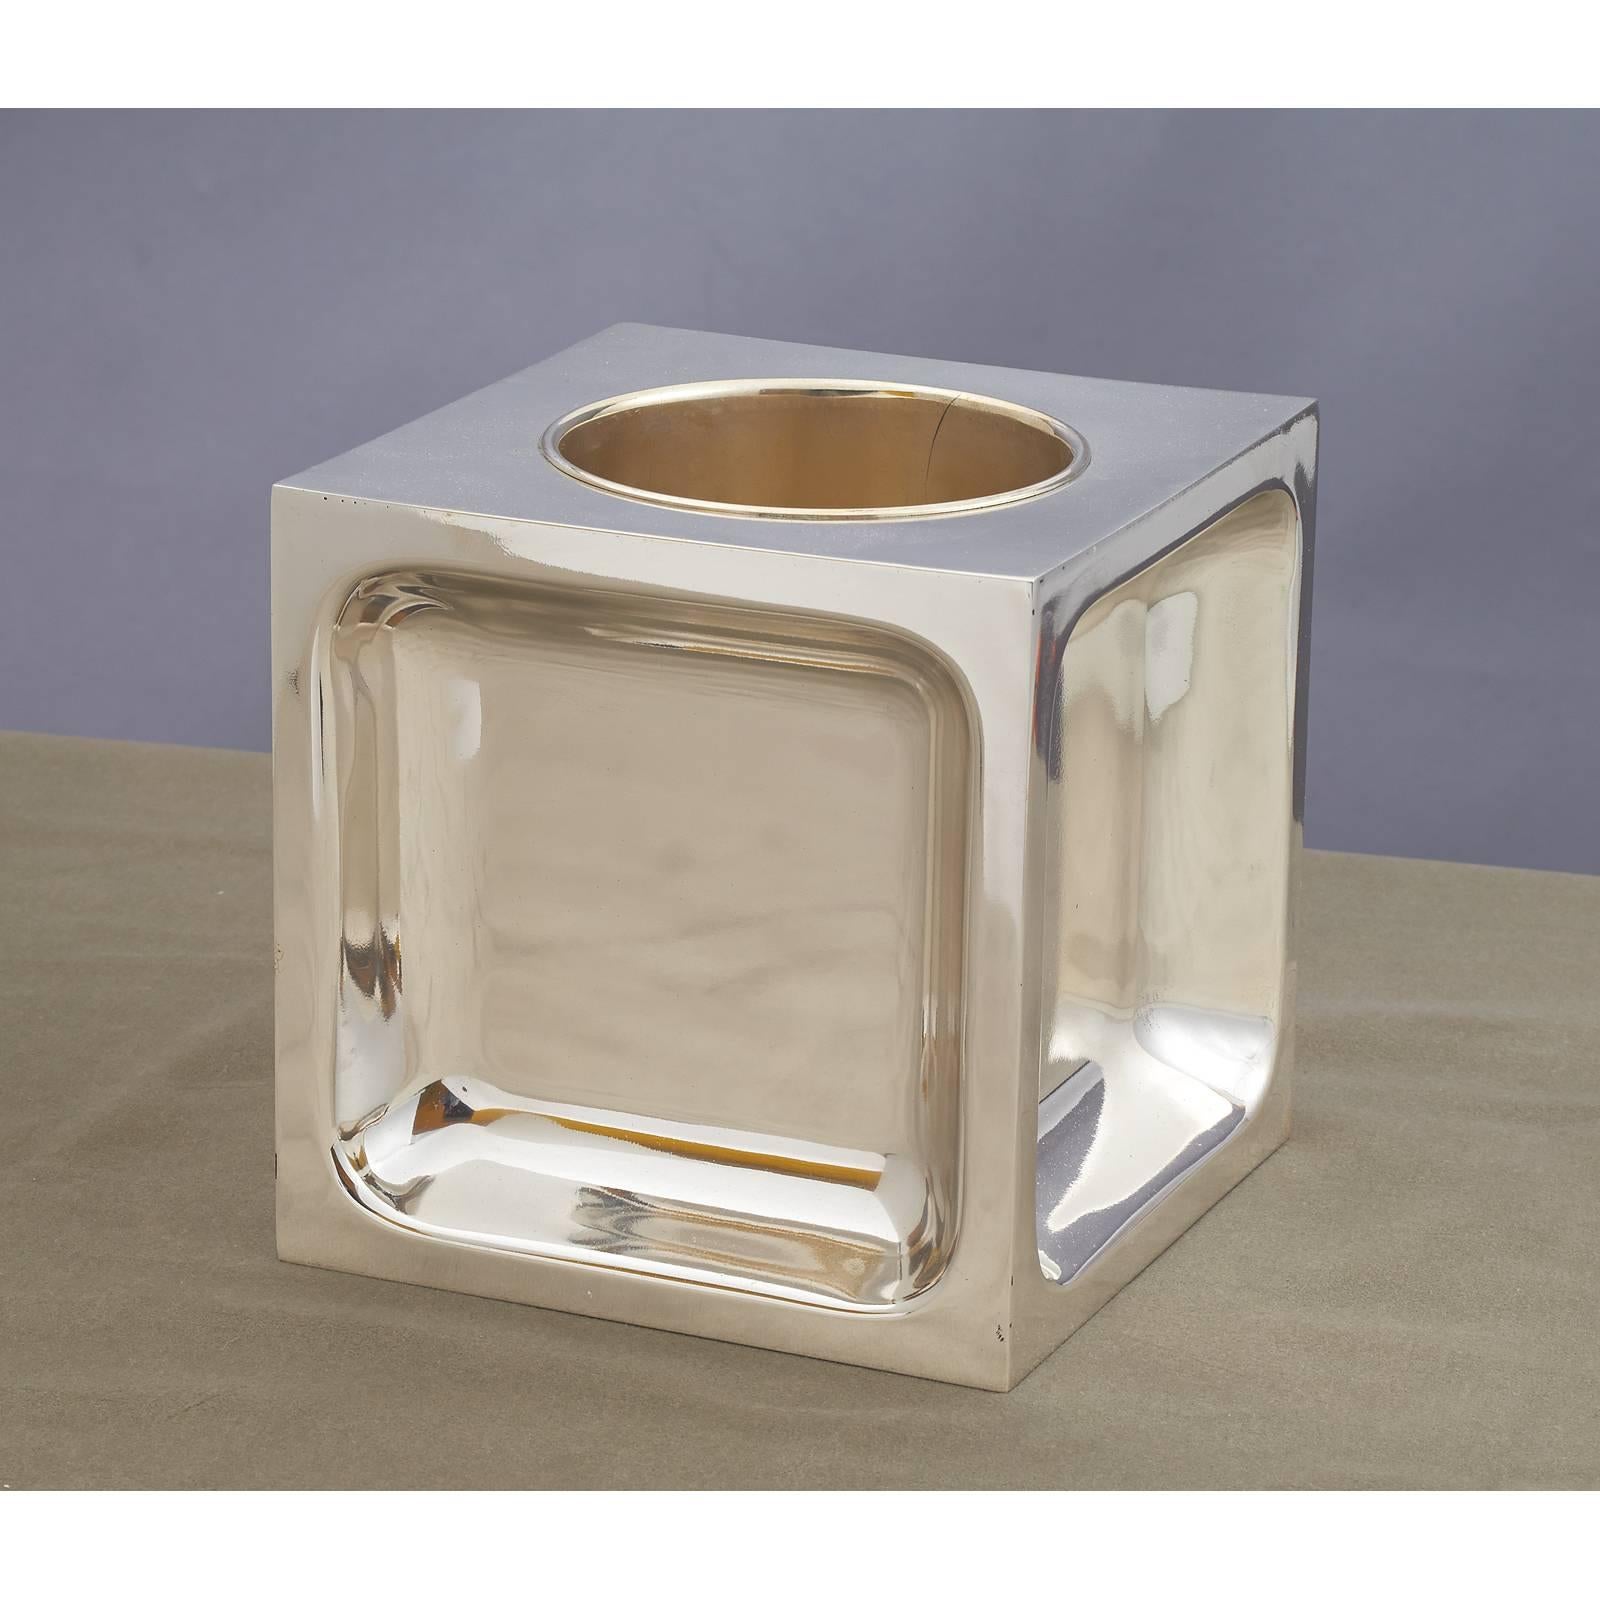 ITALY, 1970's
Geometric cube shaped wine cooler, with circular inset
Silvered metal
Dimensions: 7 x 7 x 7
 

 

